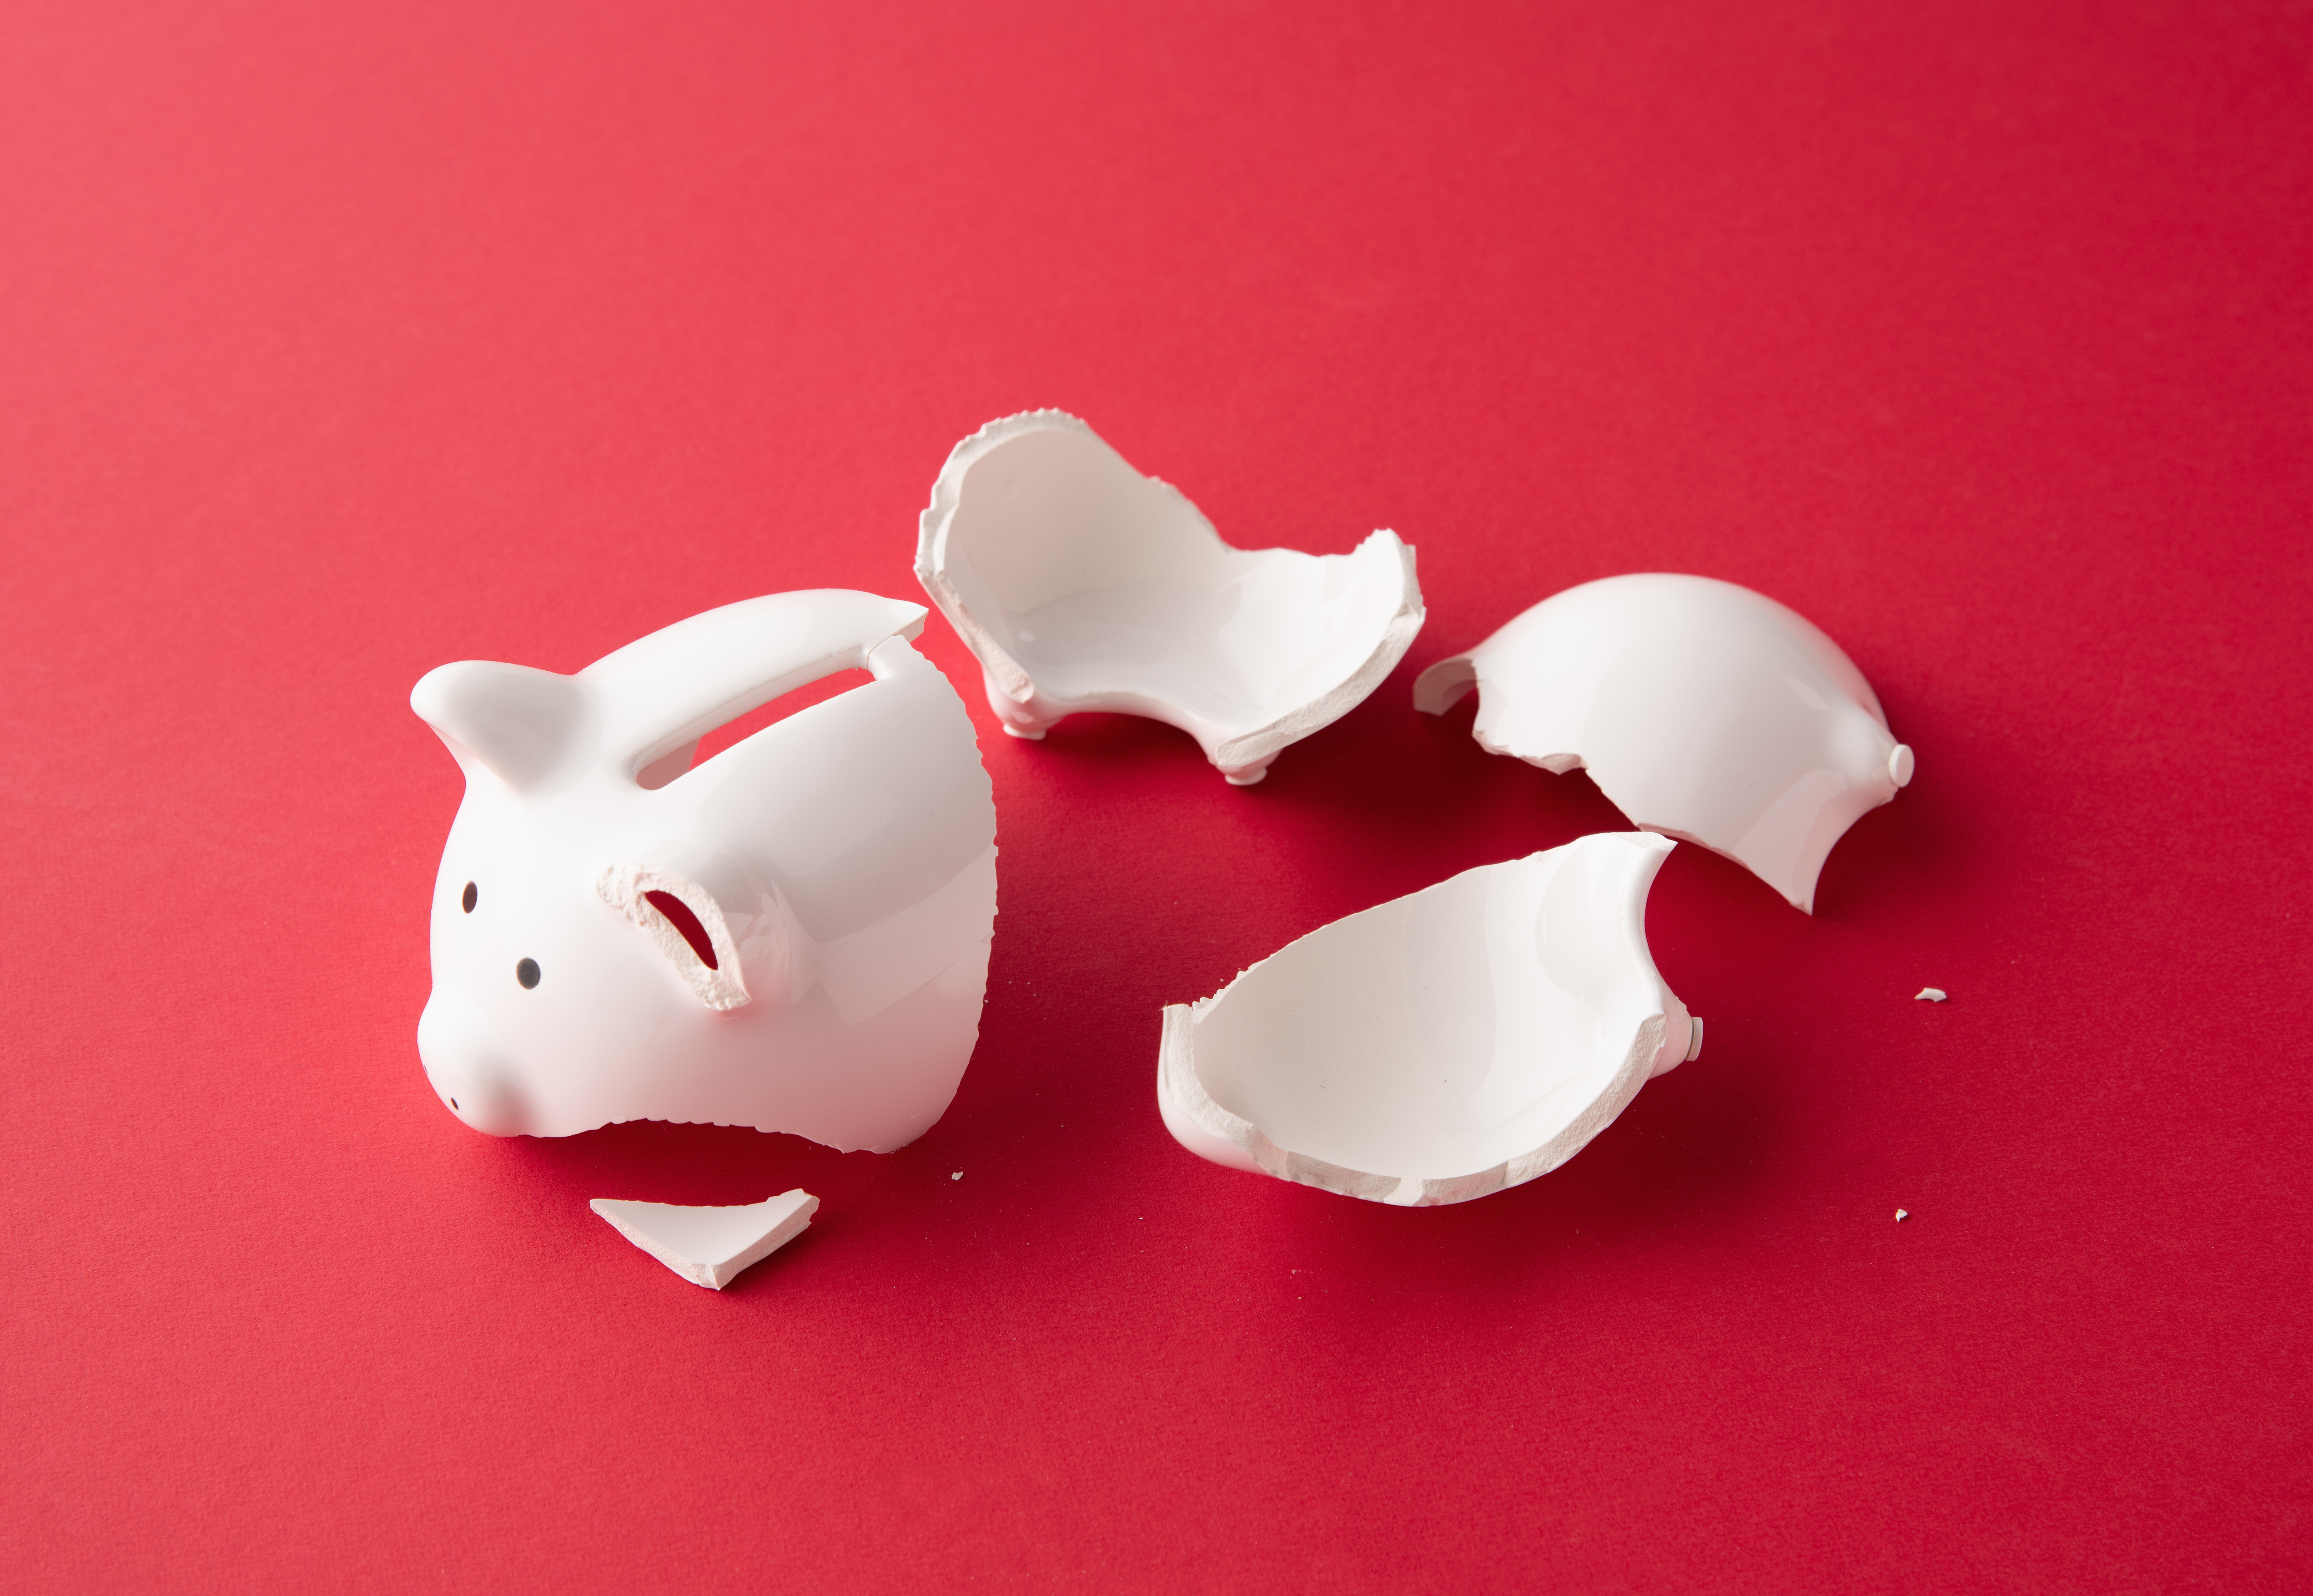 Image of white broken piggy bank on a red background.